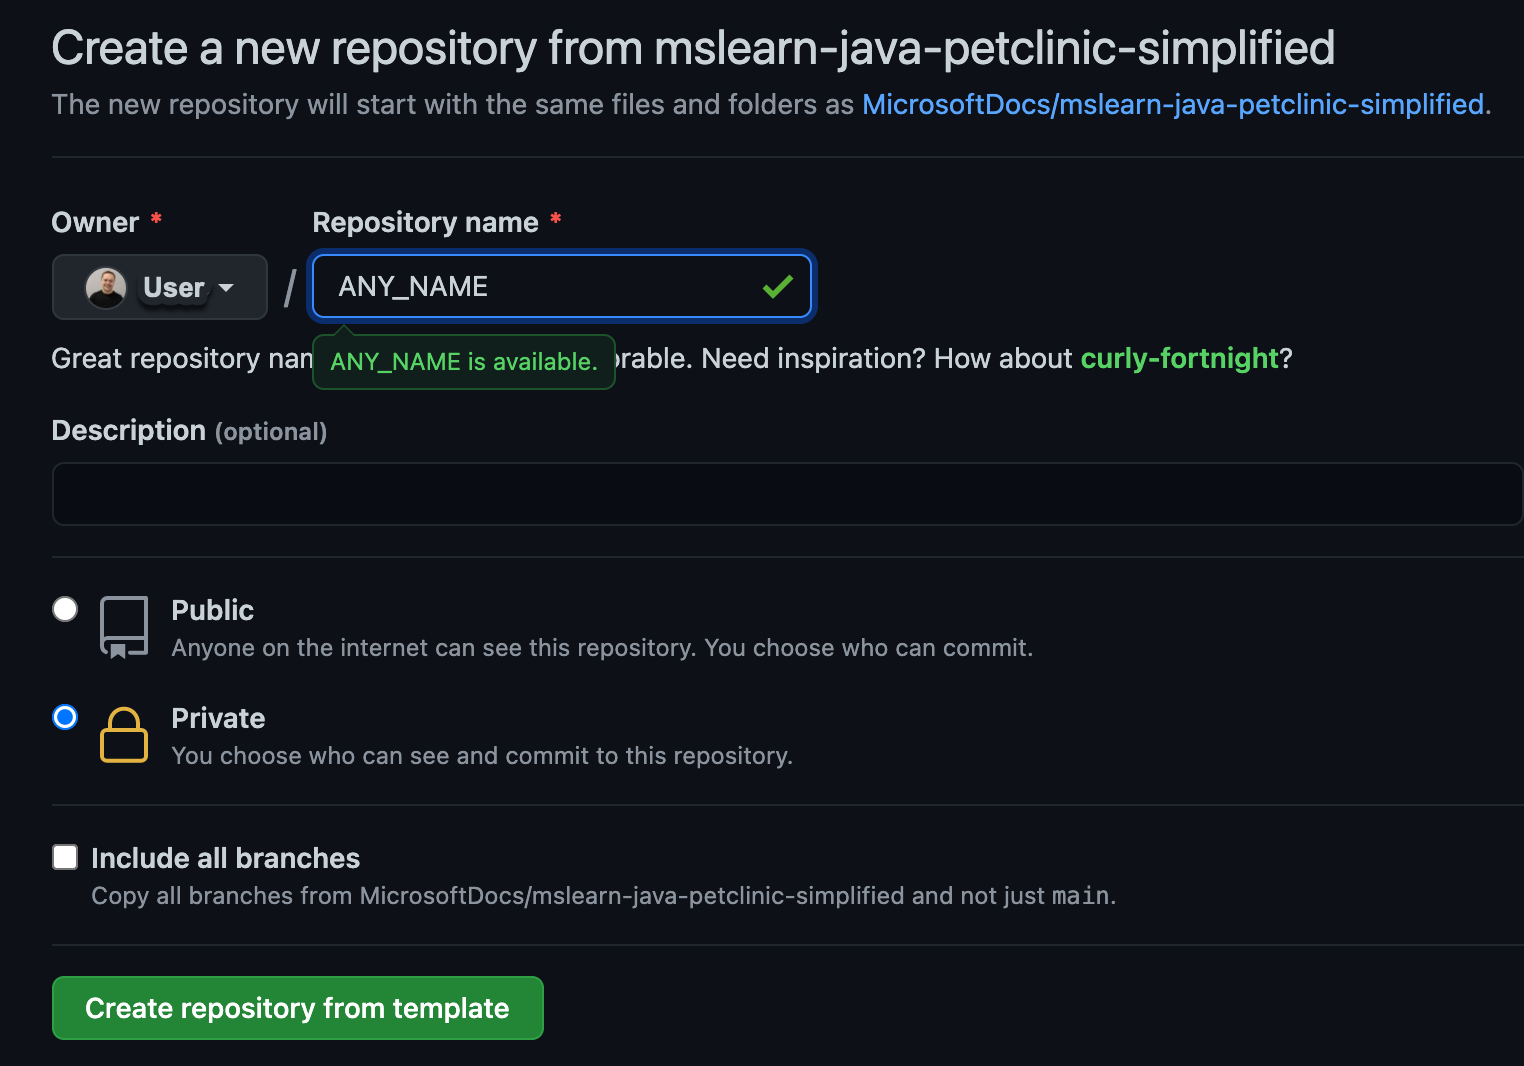 Screenshot of the "Create repository from template" button on the "Create a new repository from ..." page.